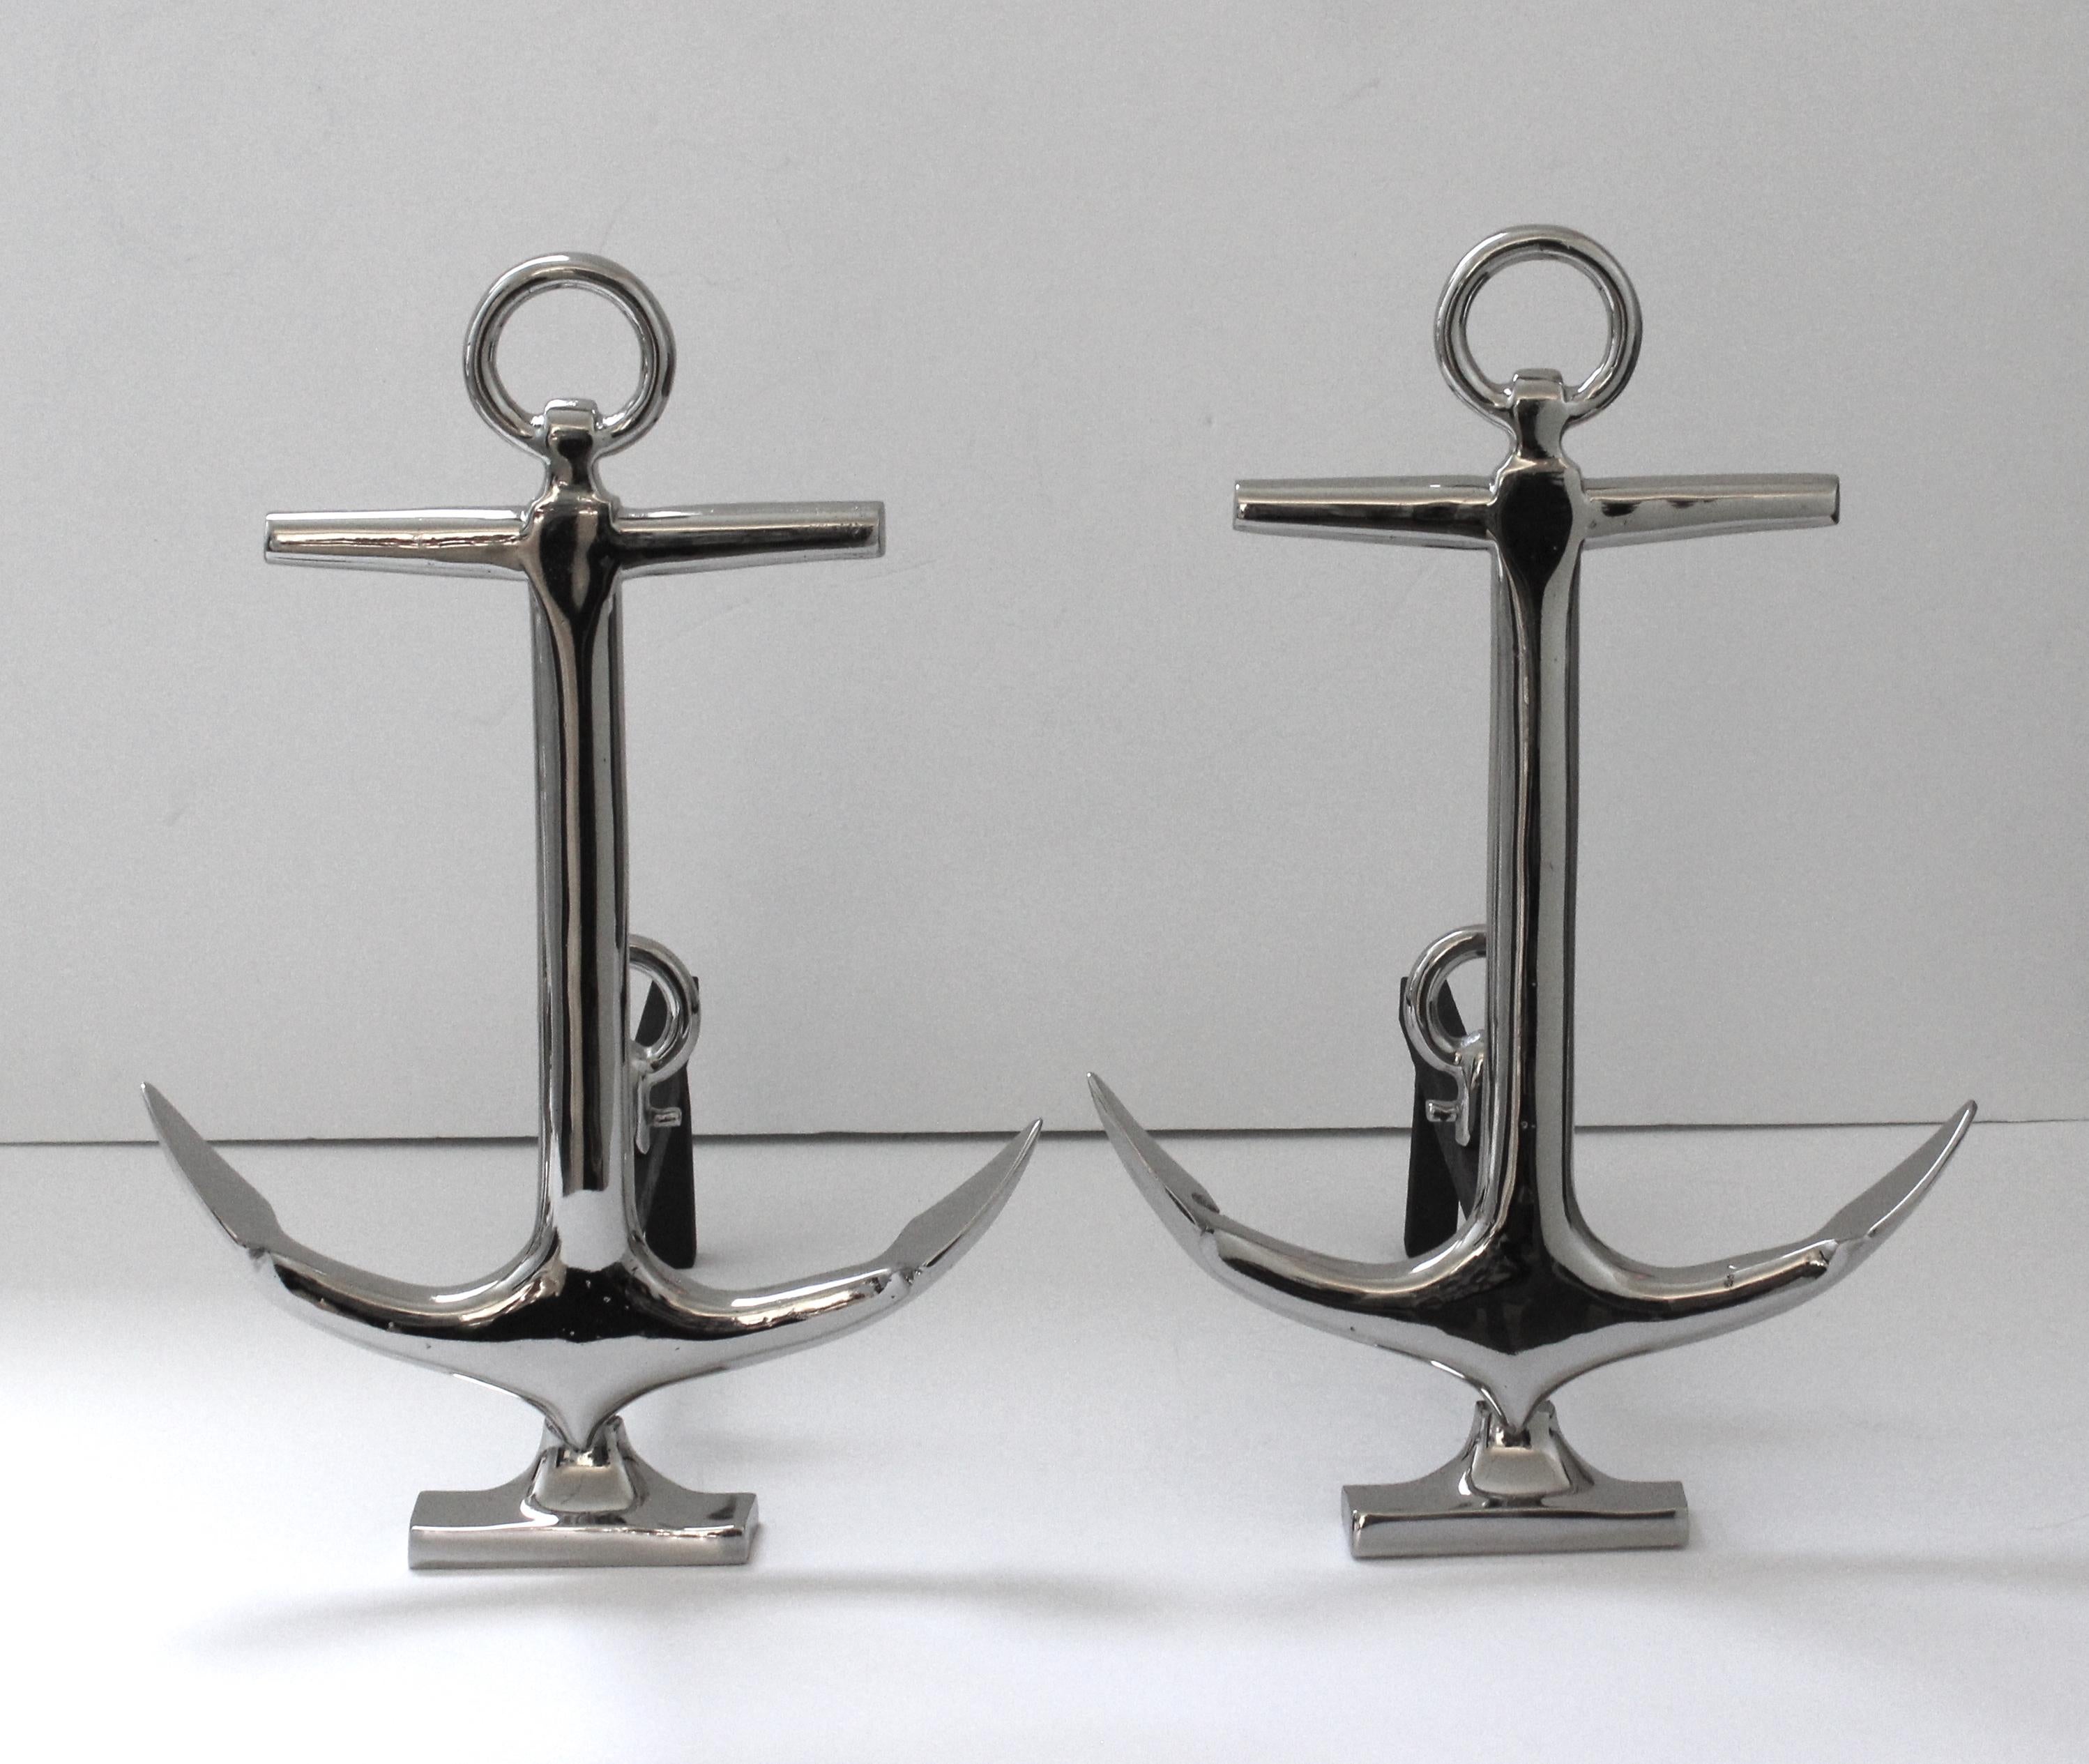 This stylish and chic set of nickel-plated anchor-form andirons date to the 1930s and are very much in the style of pieces created by Puritan. 

Note: The set have been professionally restored with a polished nickel-plated finish.